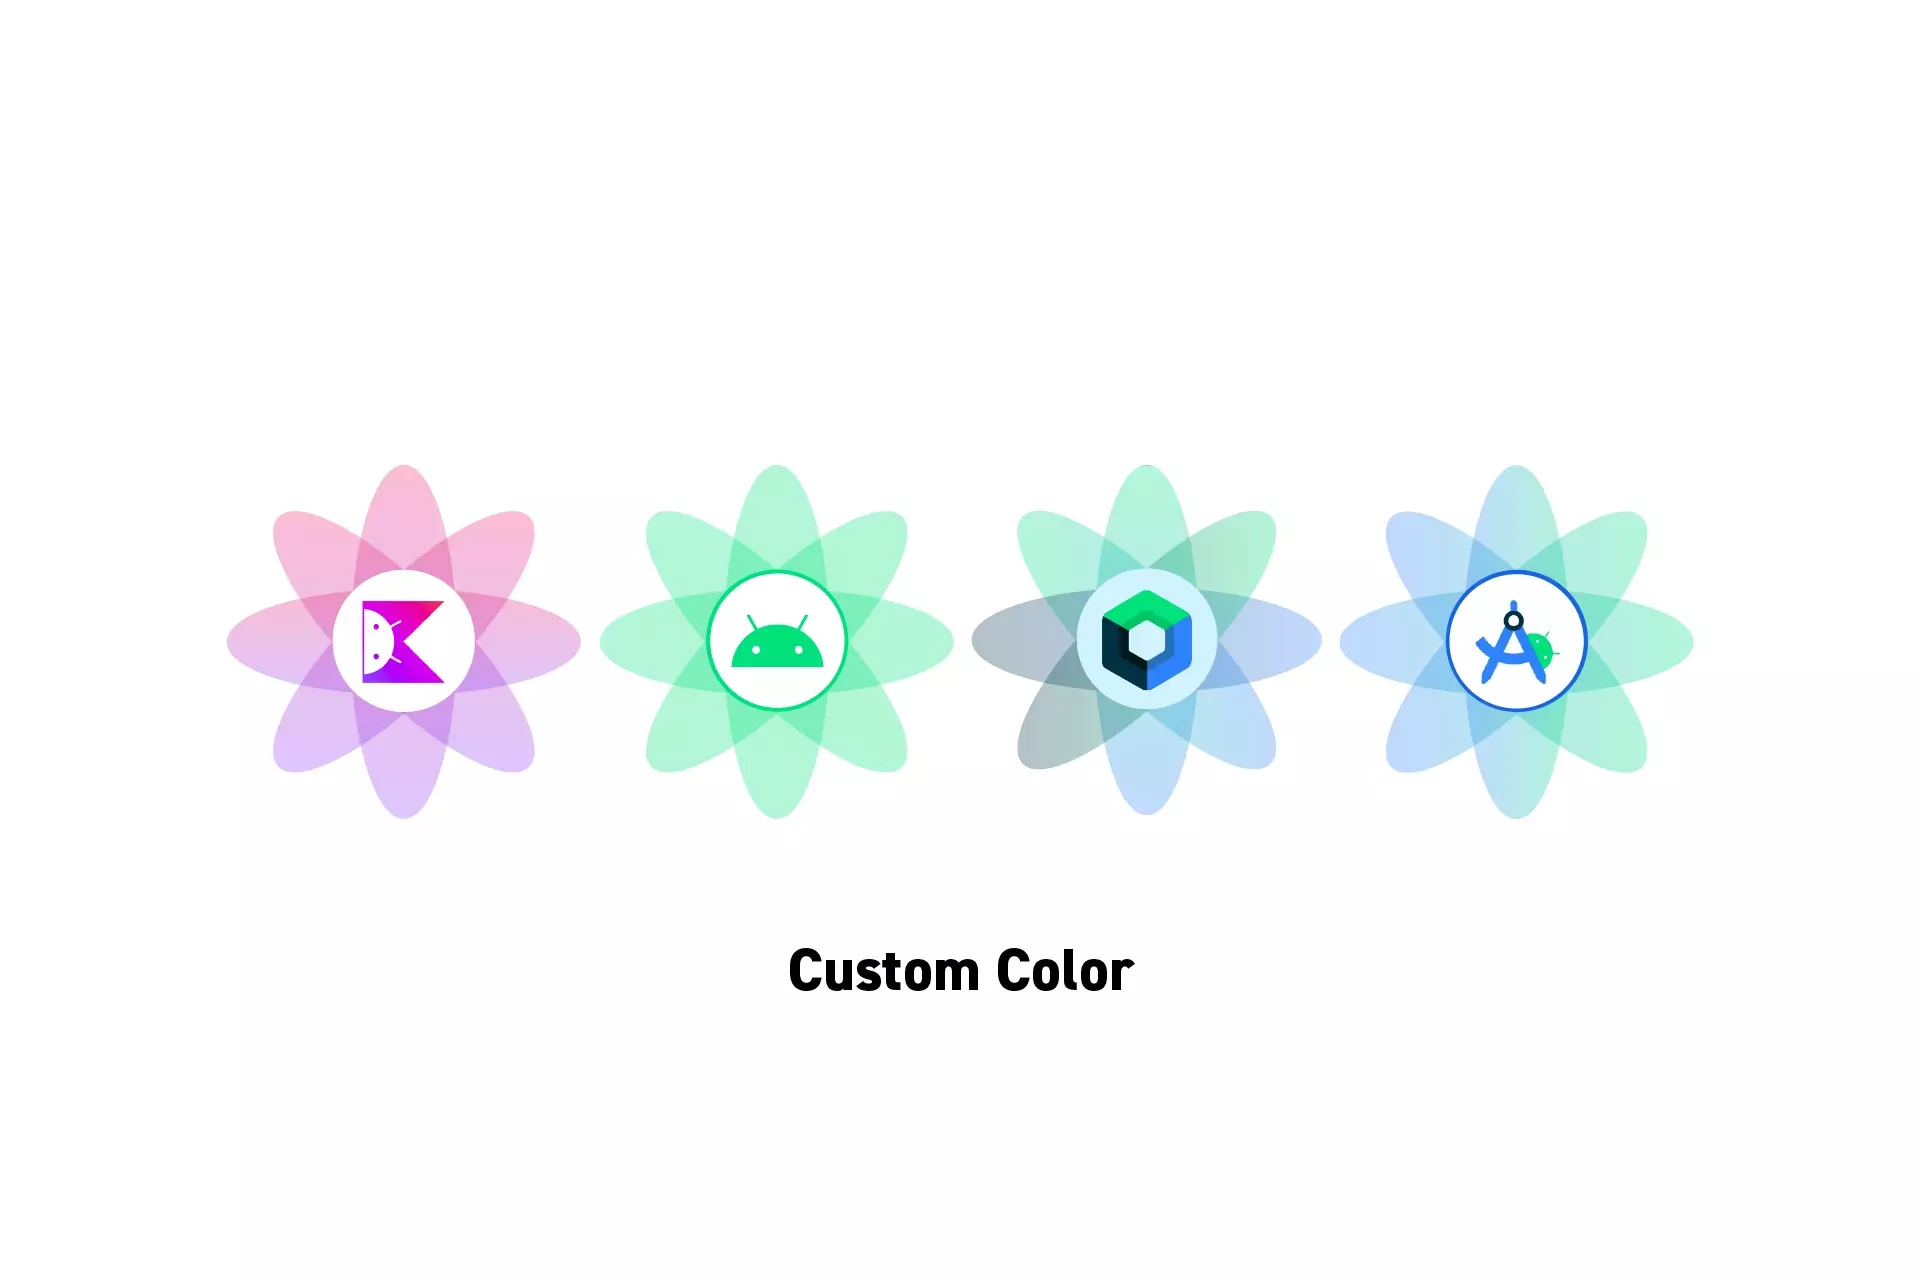 Four flowers that represent Kotlin, Android, Jetpack Compose and Android Studio. Beneath them sits the text "Custom Color"